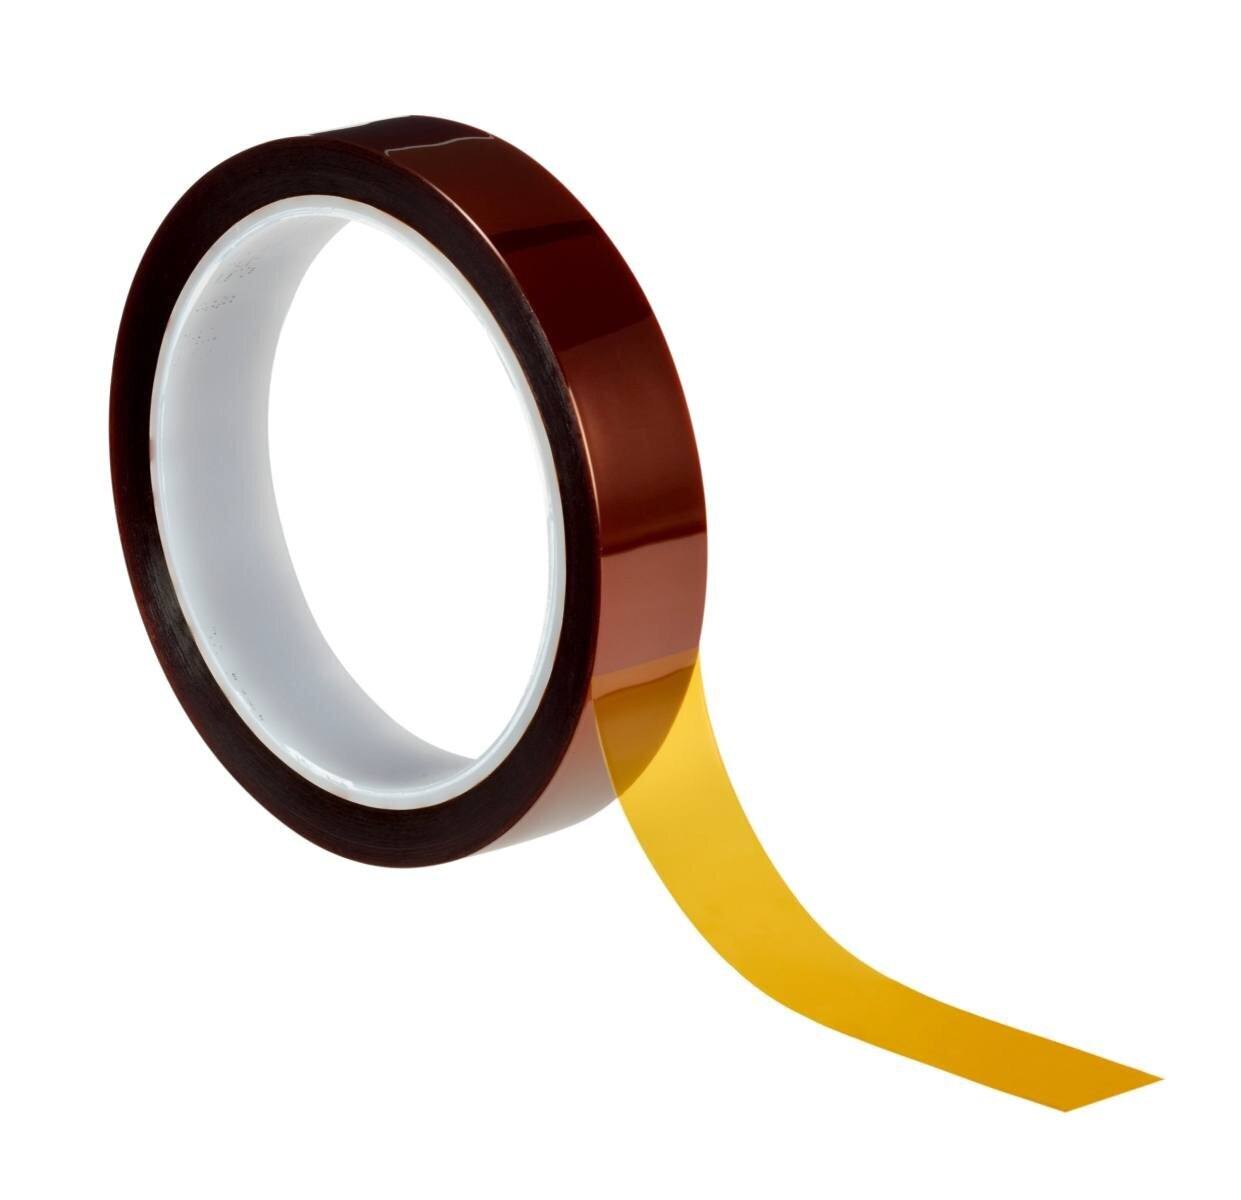 3M high temperature polyimide adhesive tape 5413, brown, 50.8 mm x 33 m, 68.58 µm